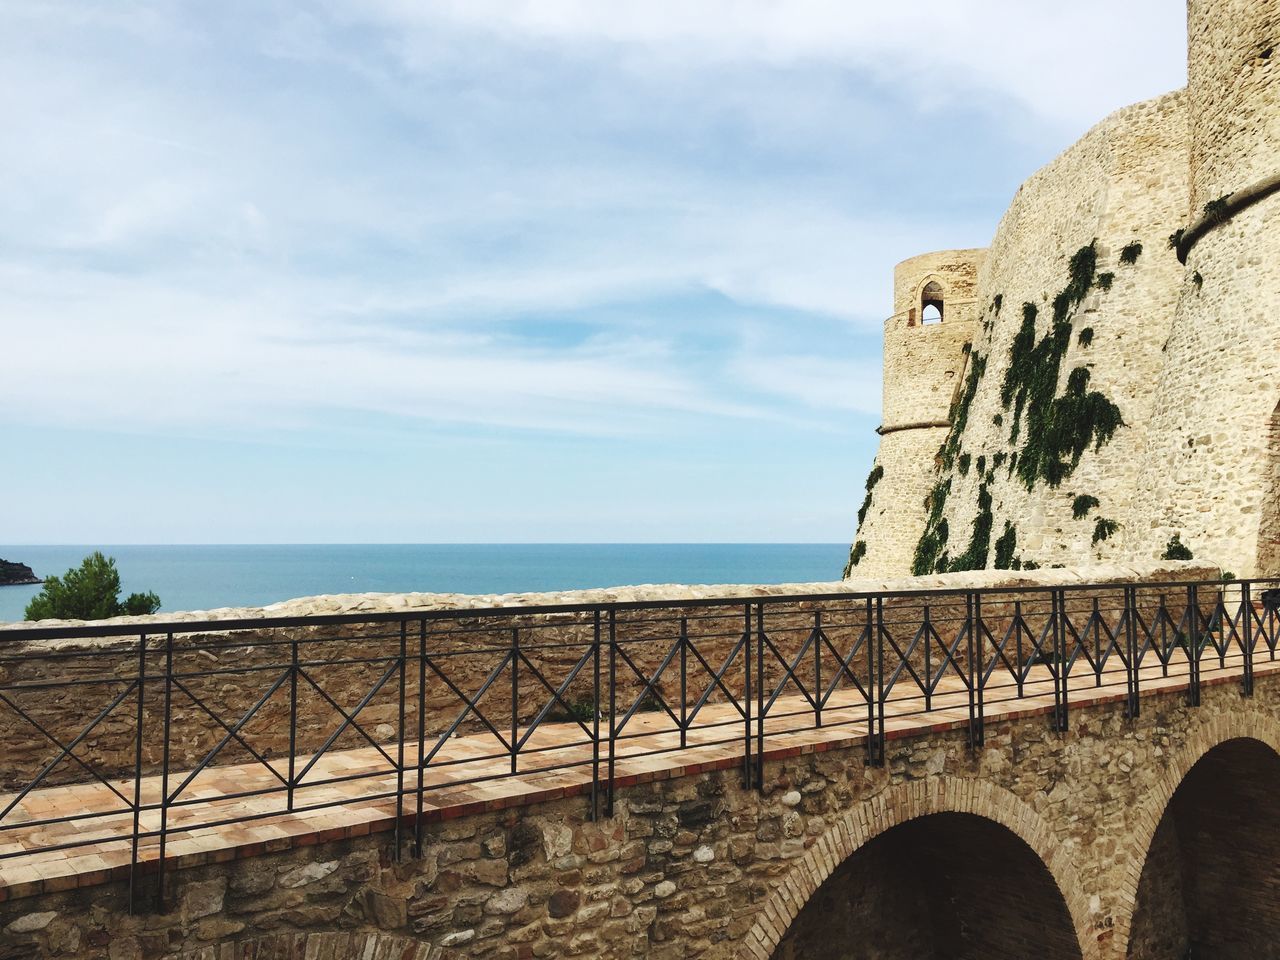 architecture, built structure, horizon over water, sky, history, sea, travel destinations, tourism, the past, building exterior, arch, tranquil scene, tranquility, stone wall, outdoors, day, famous place, stone material, cloud - sky, cloud, scenics, ancient, nature, medieval, no people, cliff